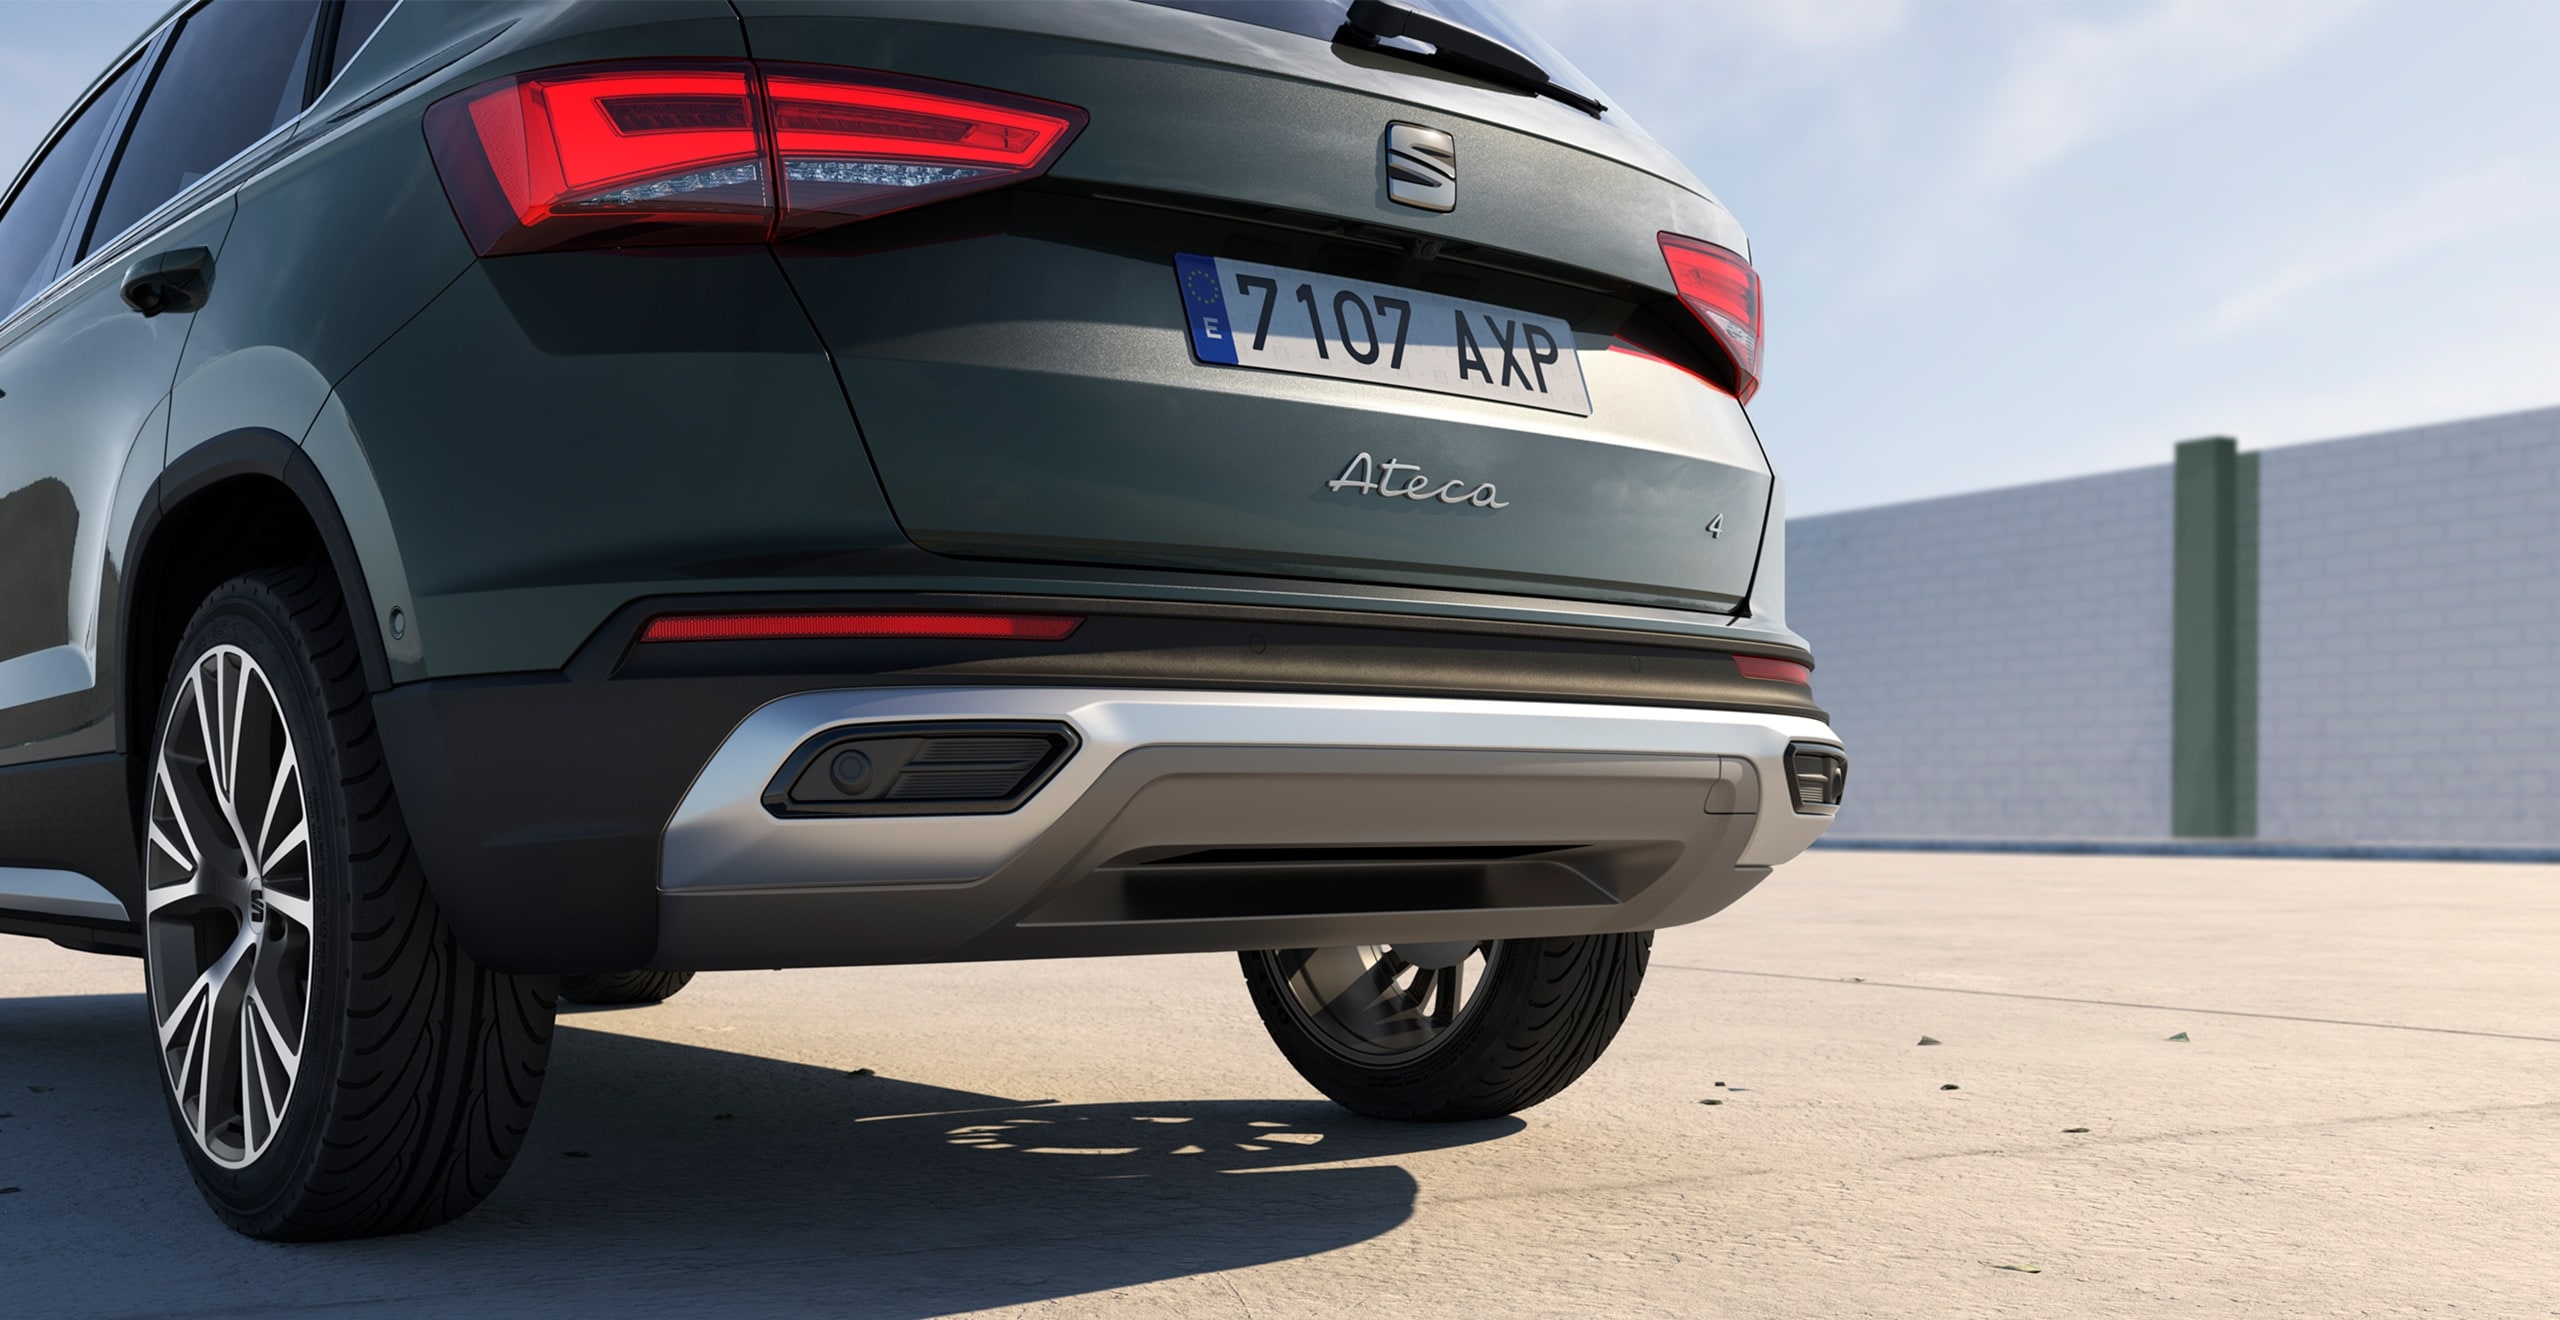 SEAT Ateca SUV exterior image close up view of rear